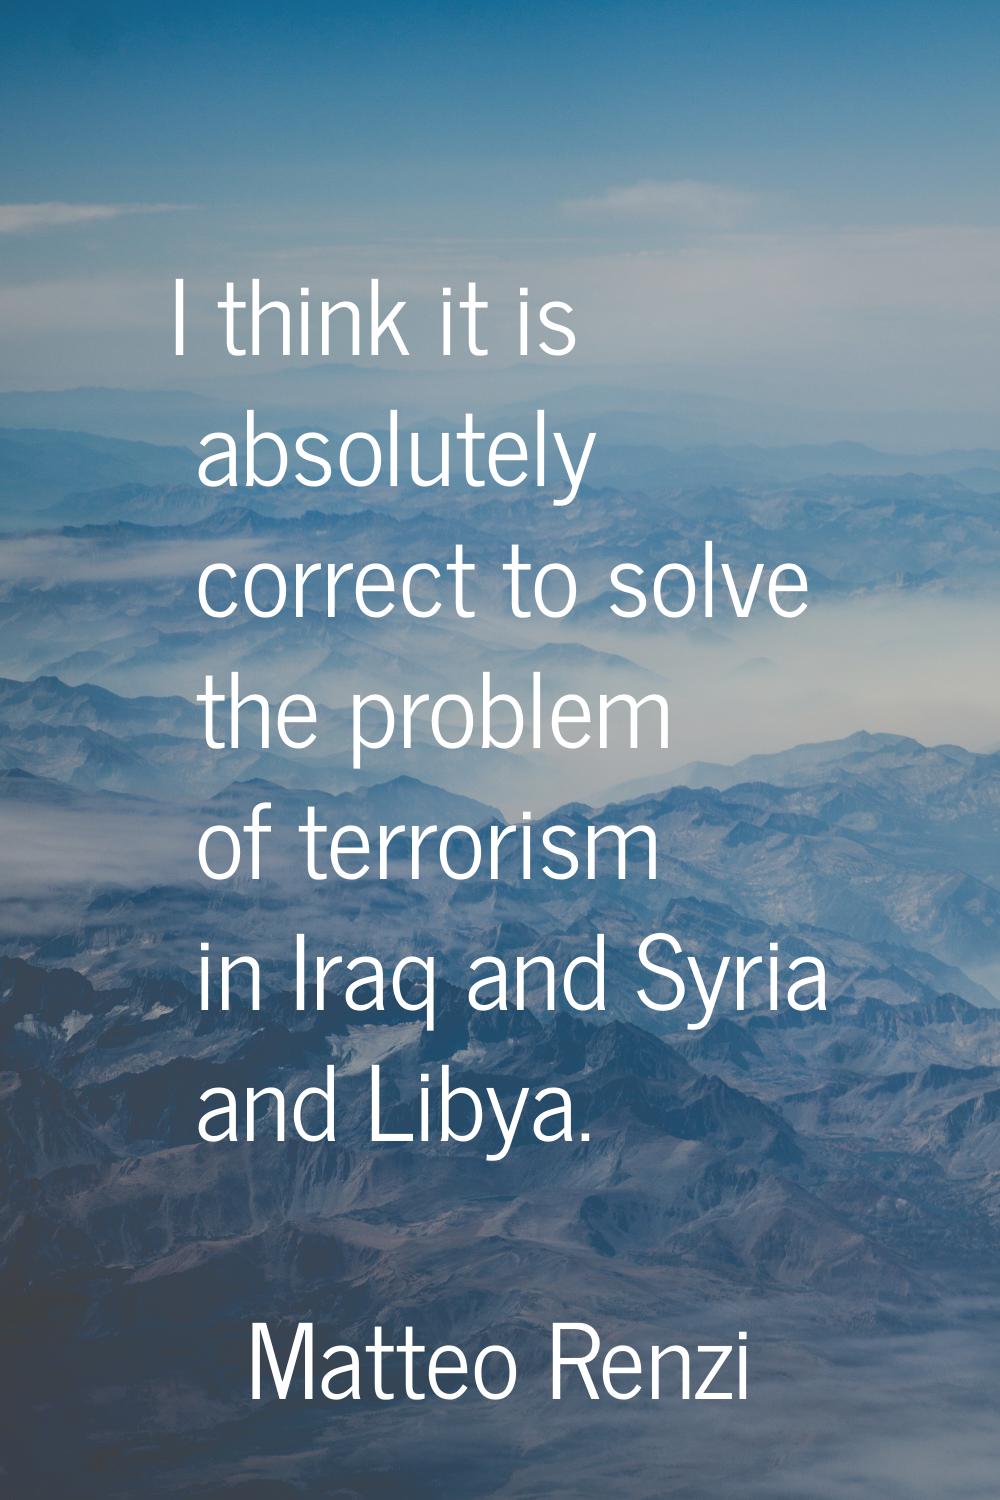 I think it is absolutely correct to solve the problem of terrorism in Iraq and Syria and Libya.